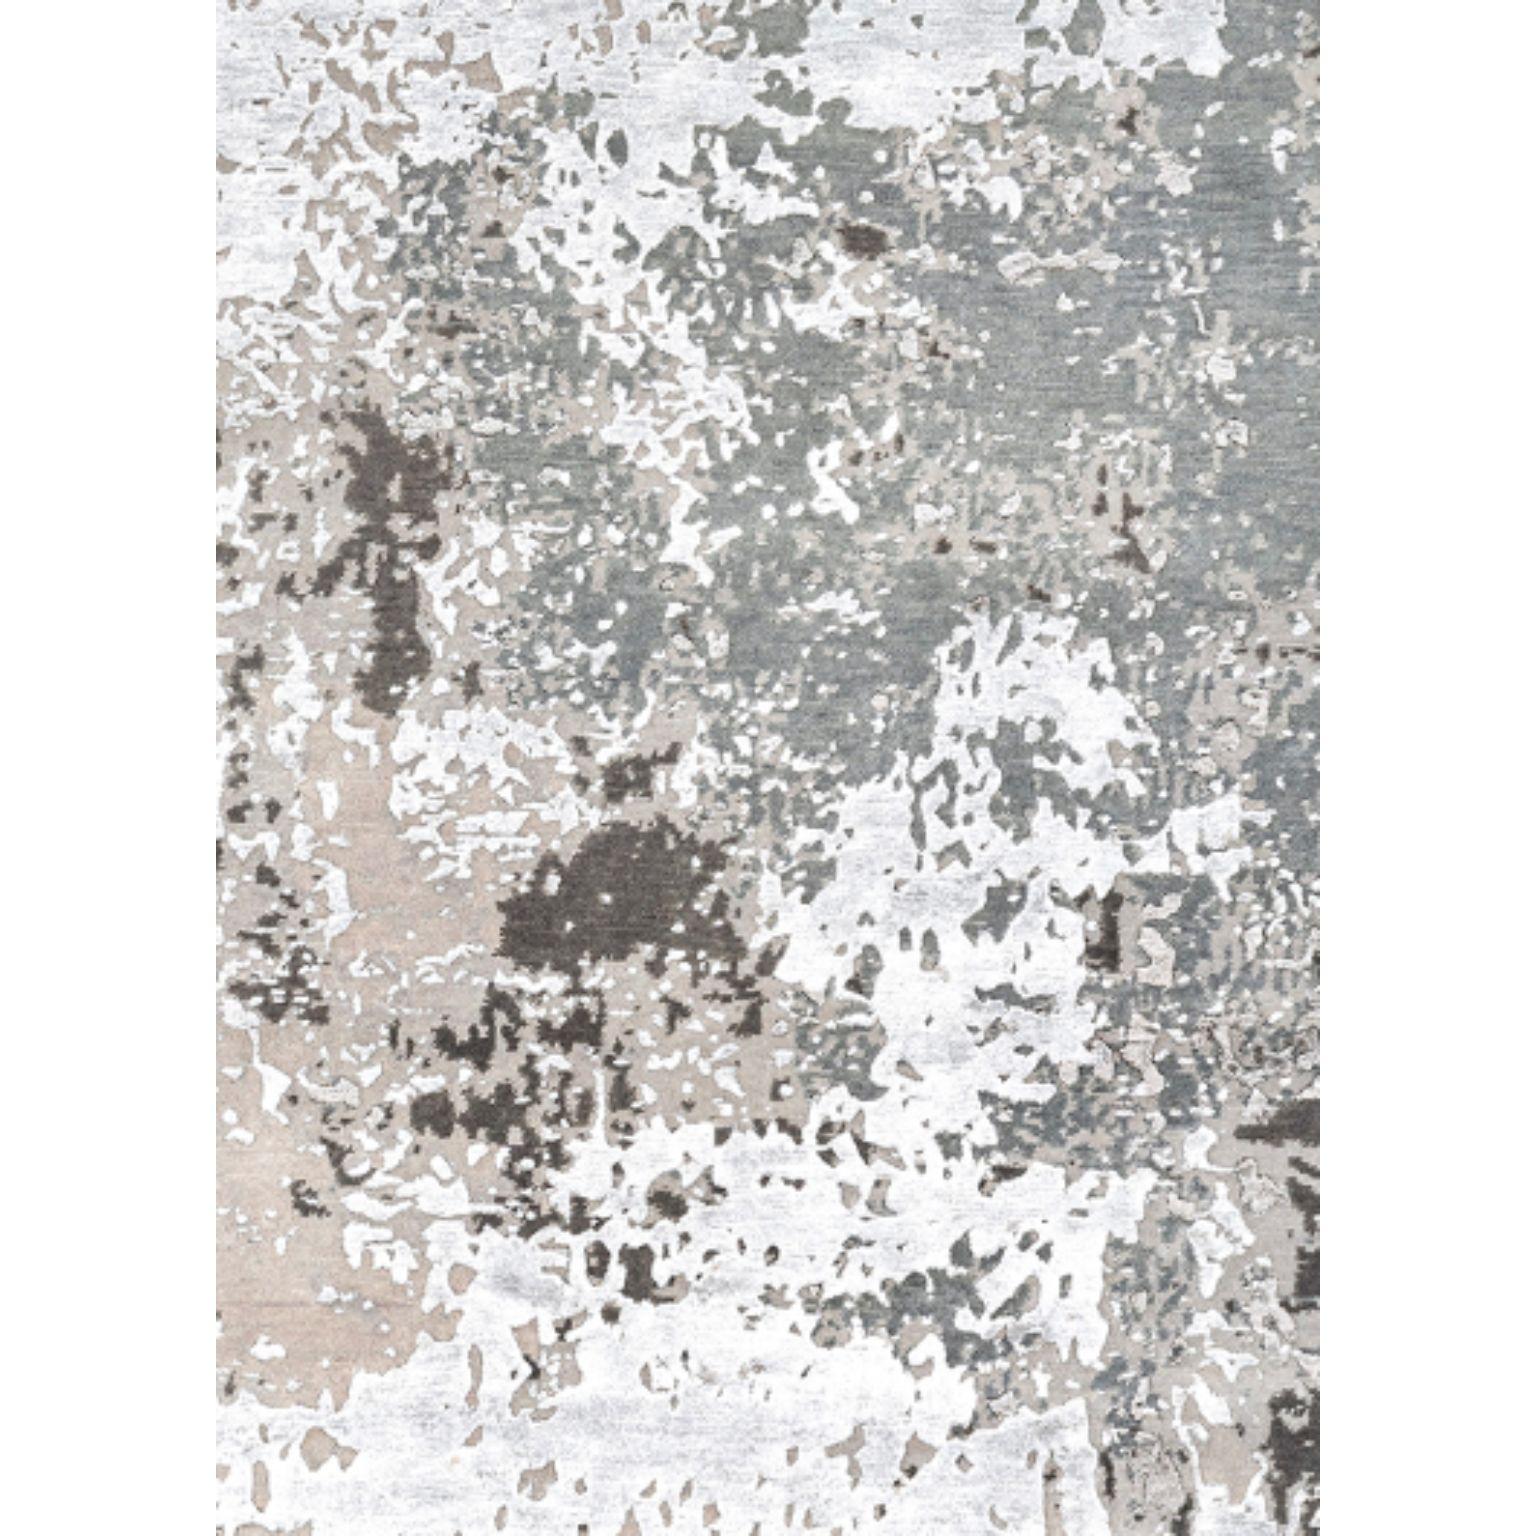 RAW 200 rug by Illulian.
Dimensions: D300 x H200 cm.
Materials: wool 50% , silk 50%
Variations available and prices may vary according to materials and sizes. 

Illulian, historic and prestigious rug company brand, internationally renowned in